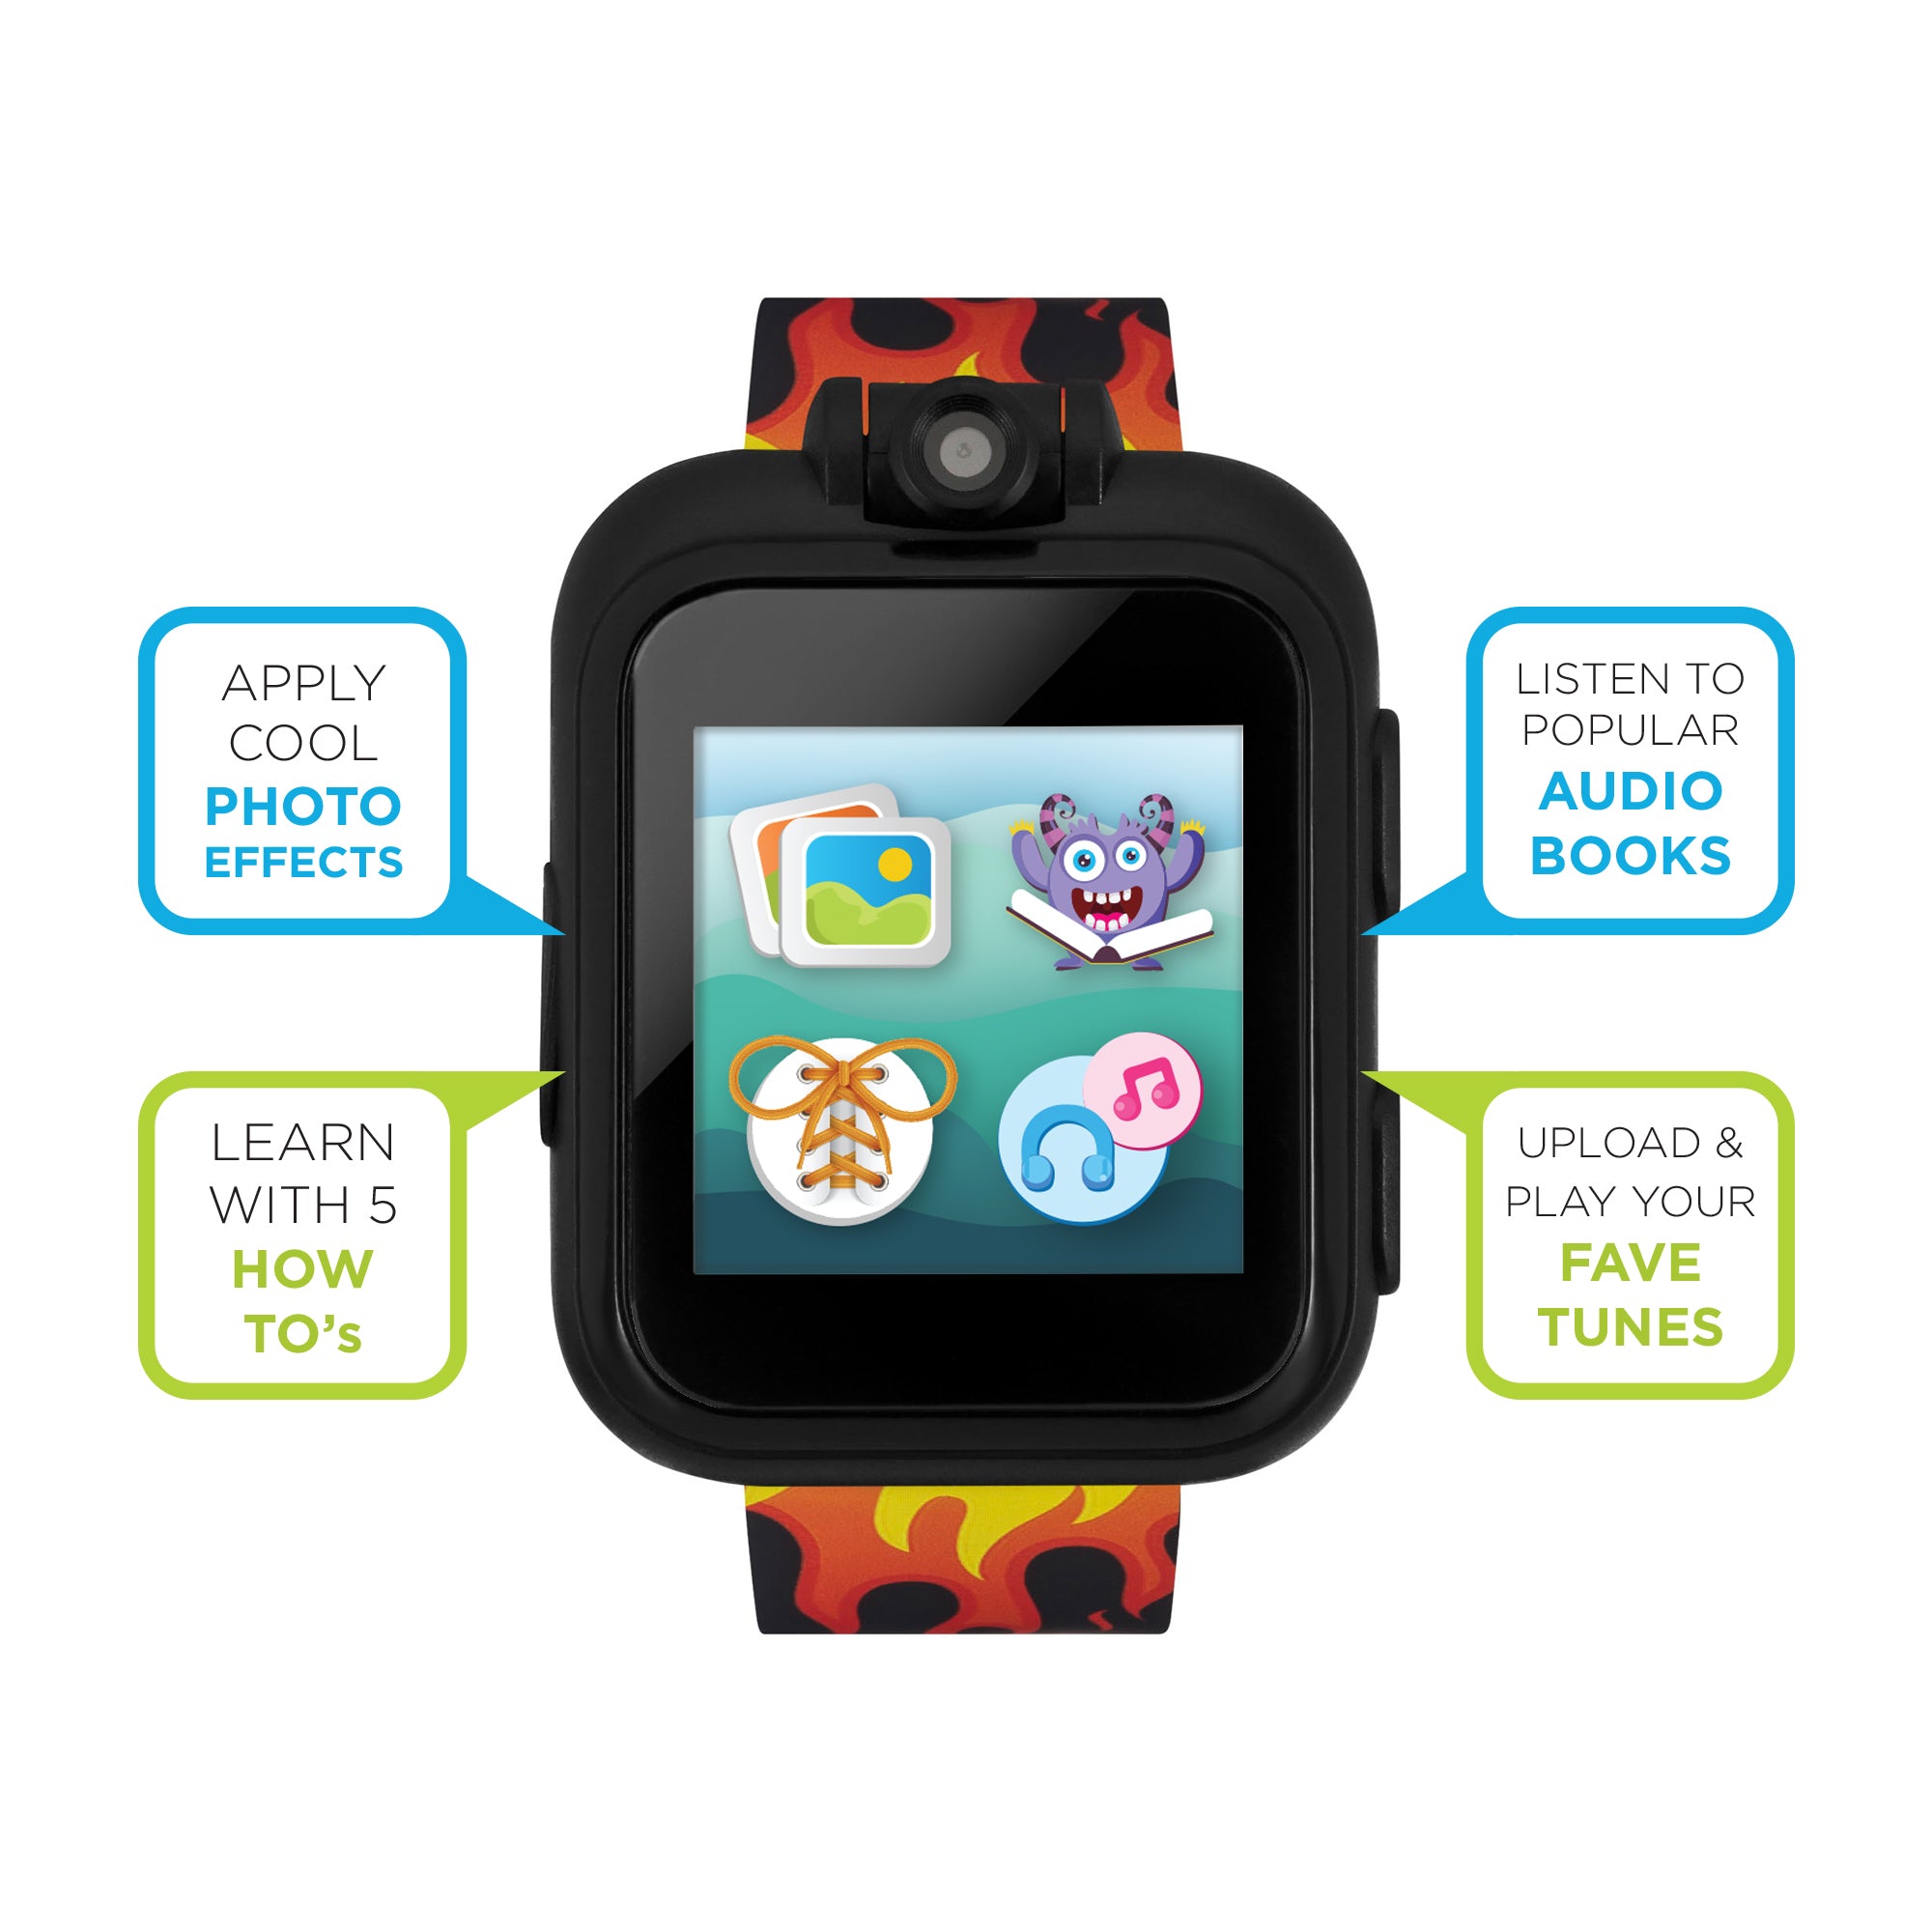 PlayZoom 2 Kids Smartwatch with Headphones: Flame Print affordable smart watch with headphones